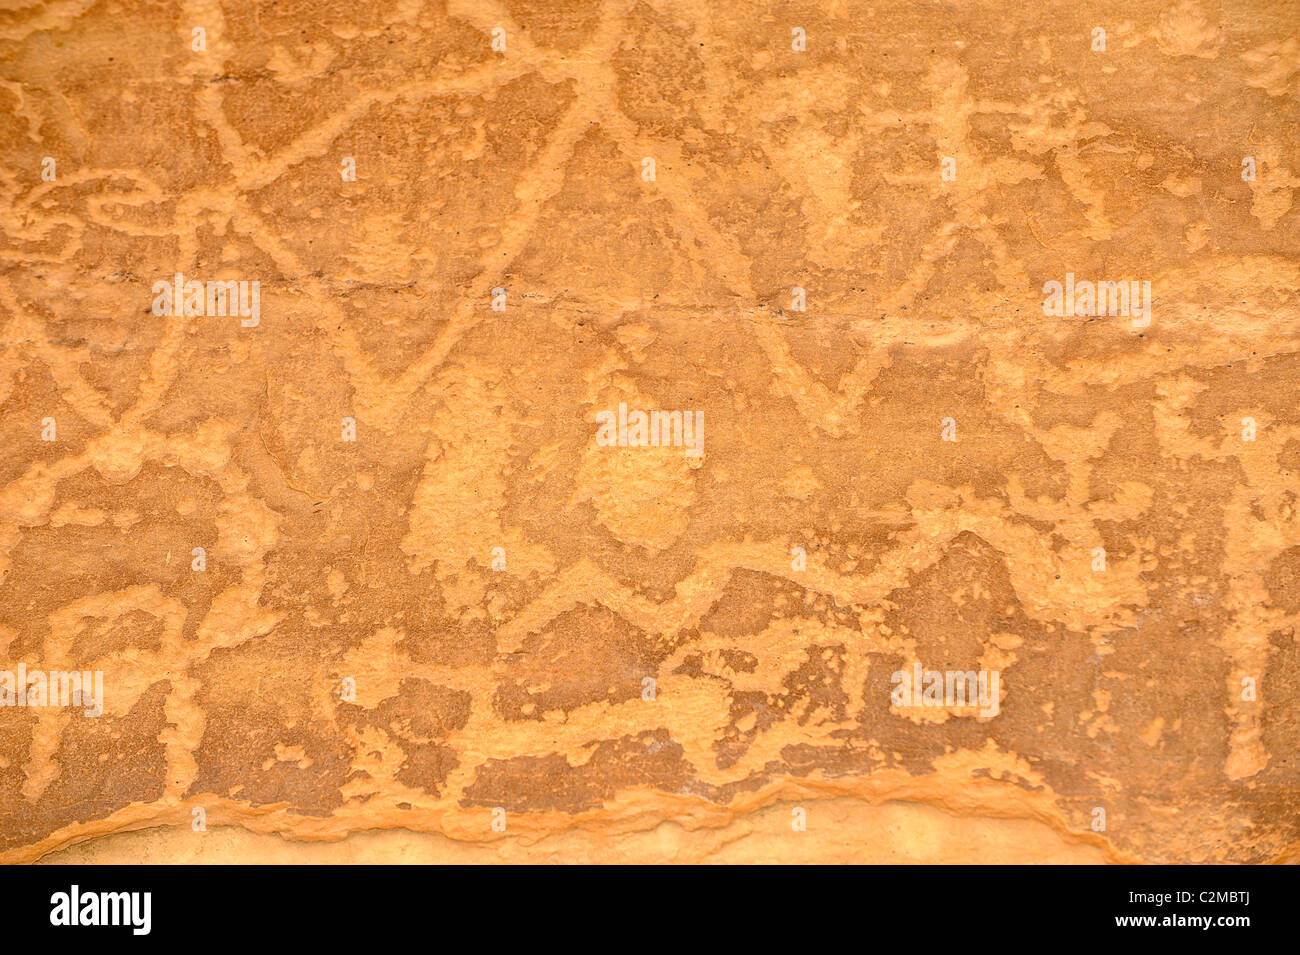 Petroglyph's engraved on a rock surface, Mesa Verde National Park Stock Photo